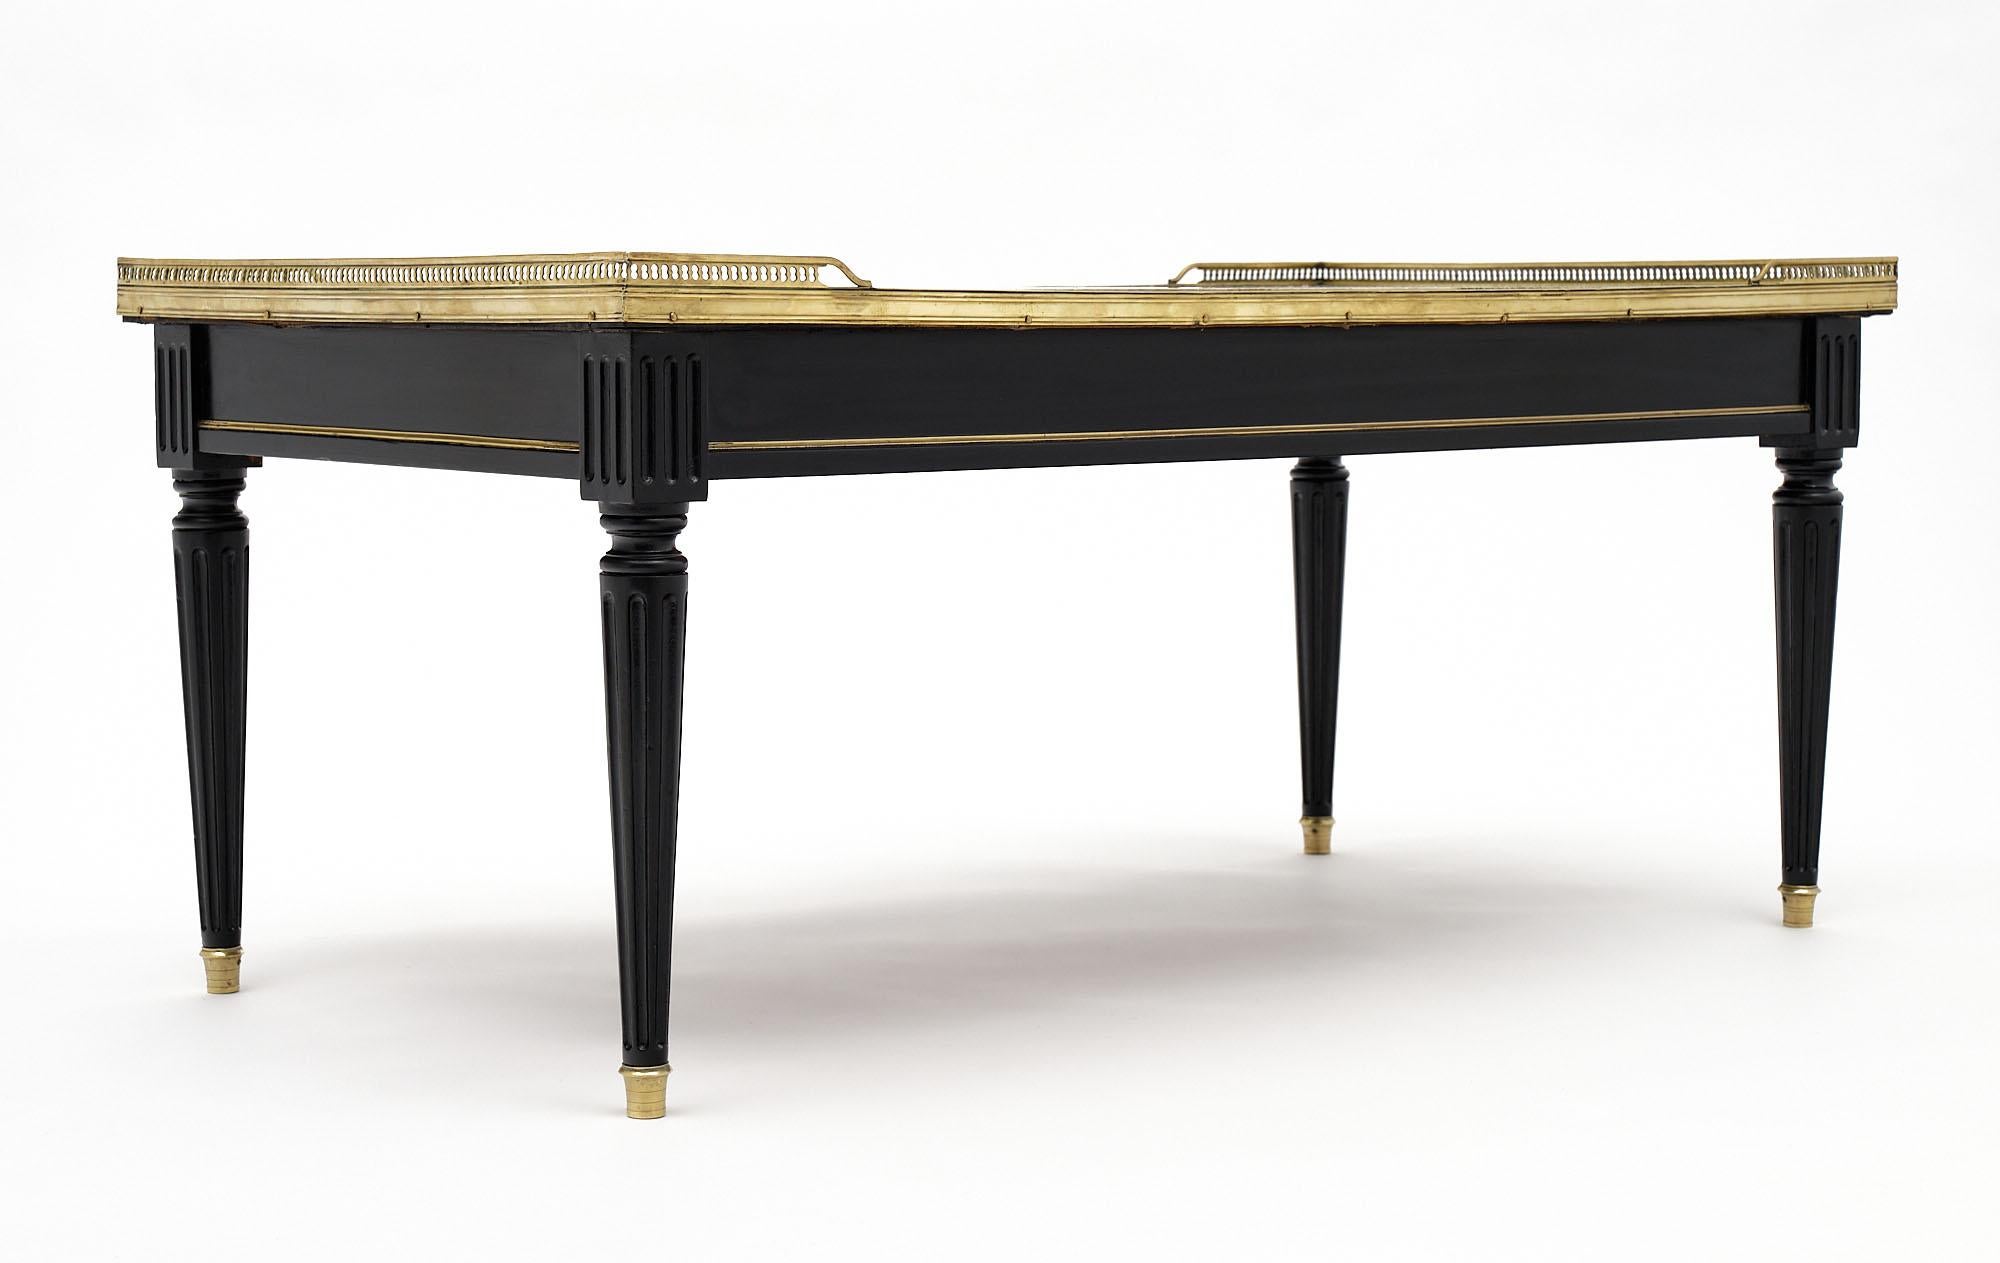 Louis XVI Maison Jansen coffee table made of ebonized mahogany with a Michelangelo Carrara marble top. The marble is surrounded with an opened gilt brass gallery and is supported with fluted legs. We love the brass details and beautiful Classic